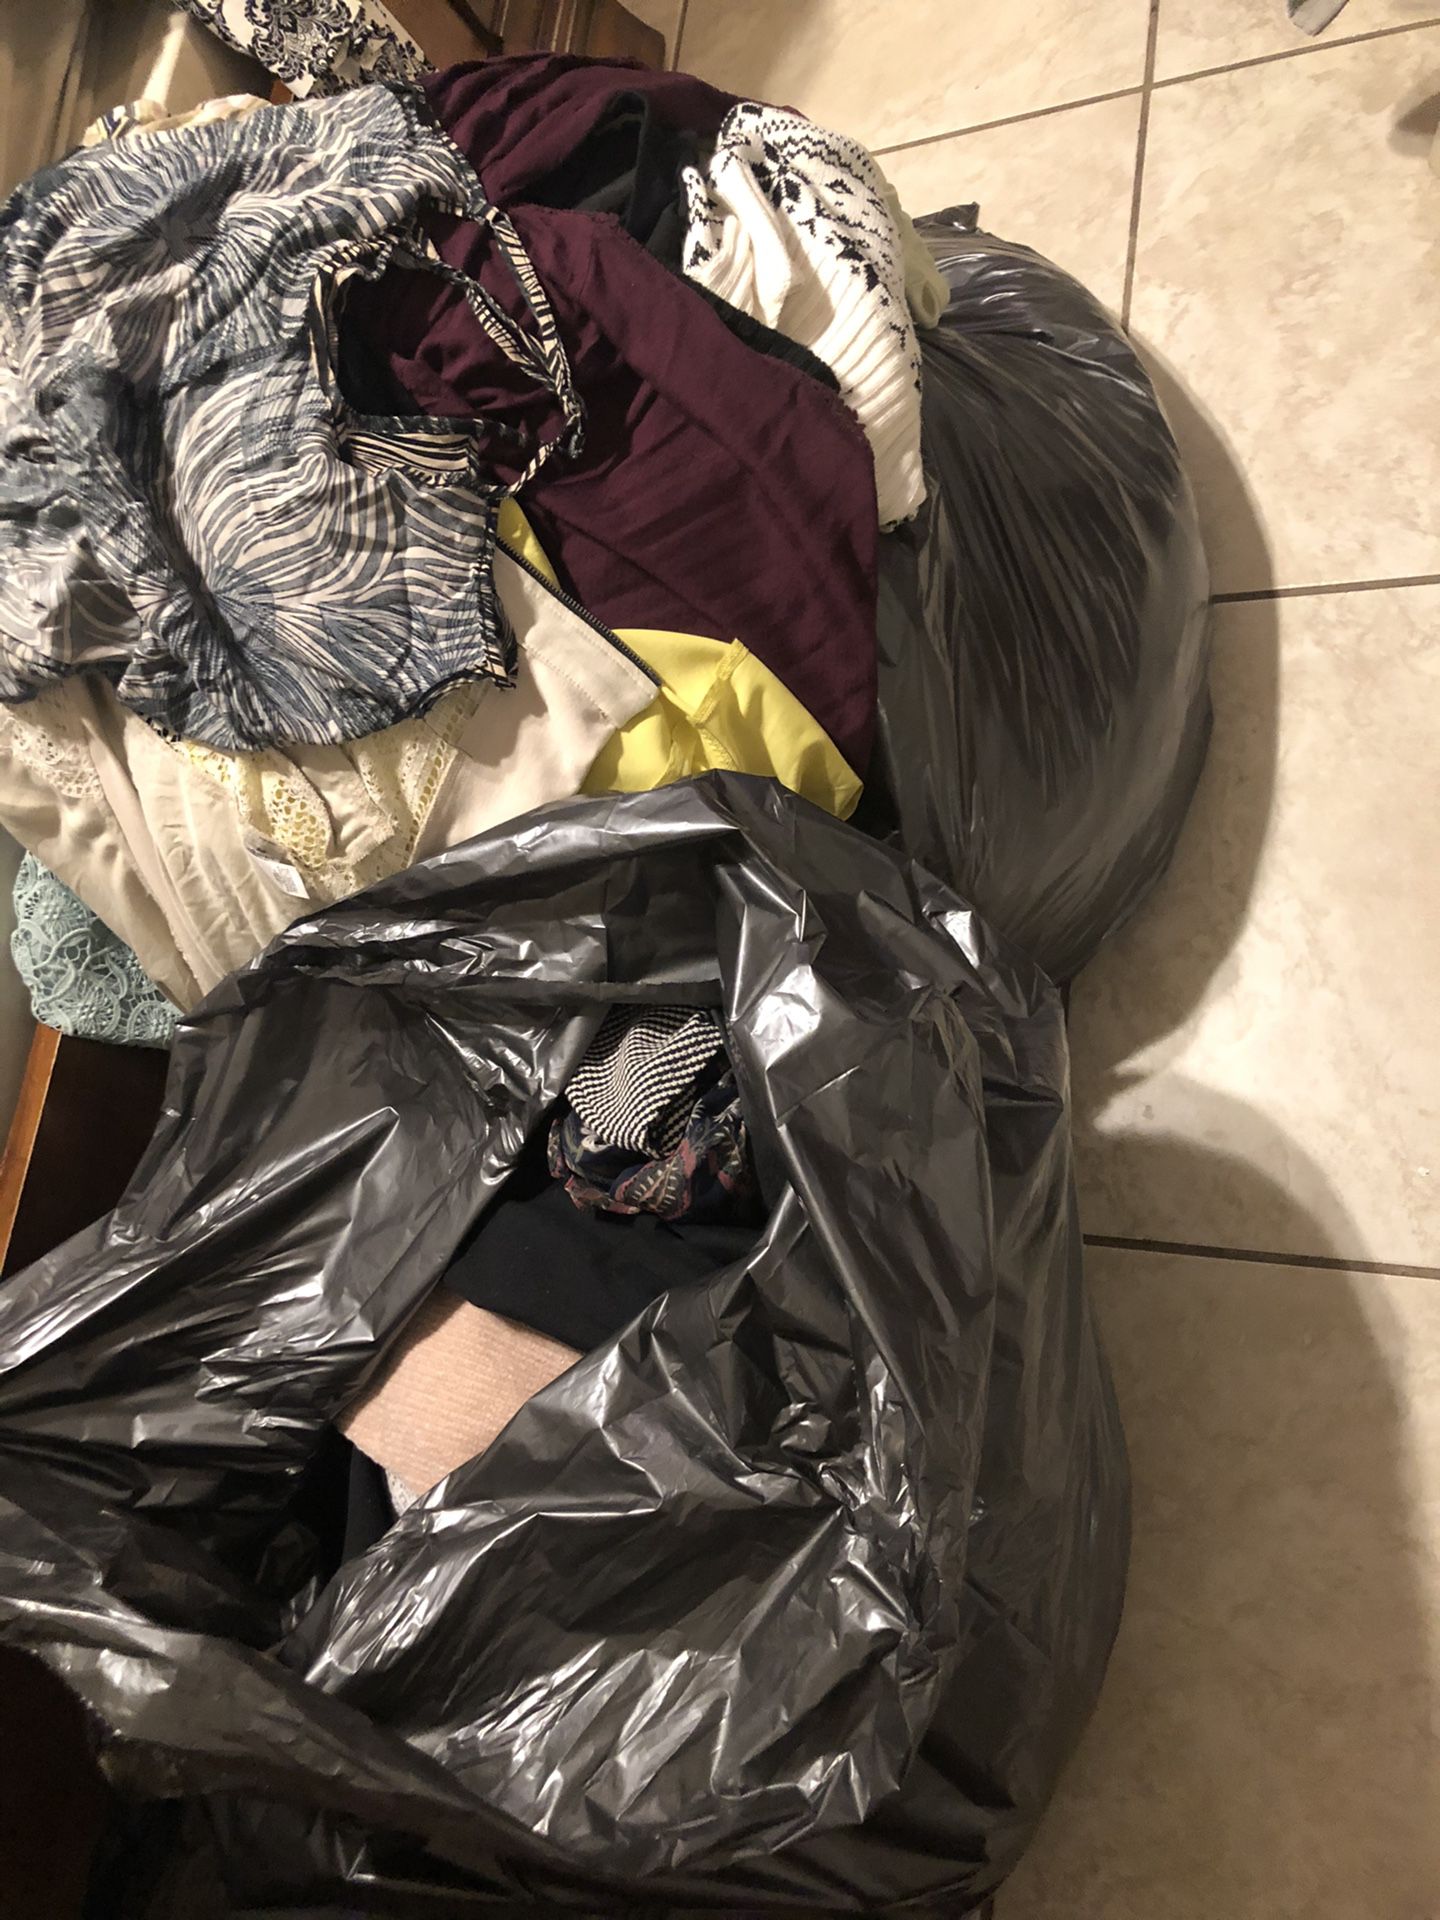 Huge lot of women’s clothes